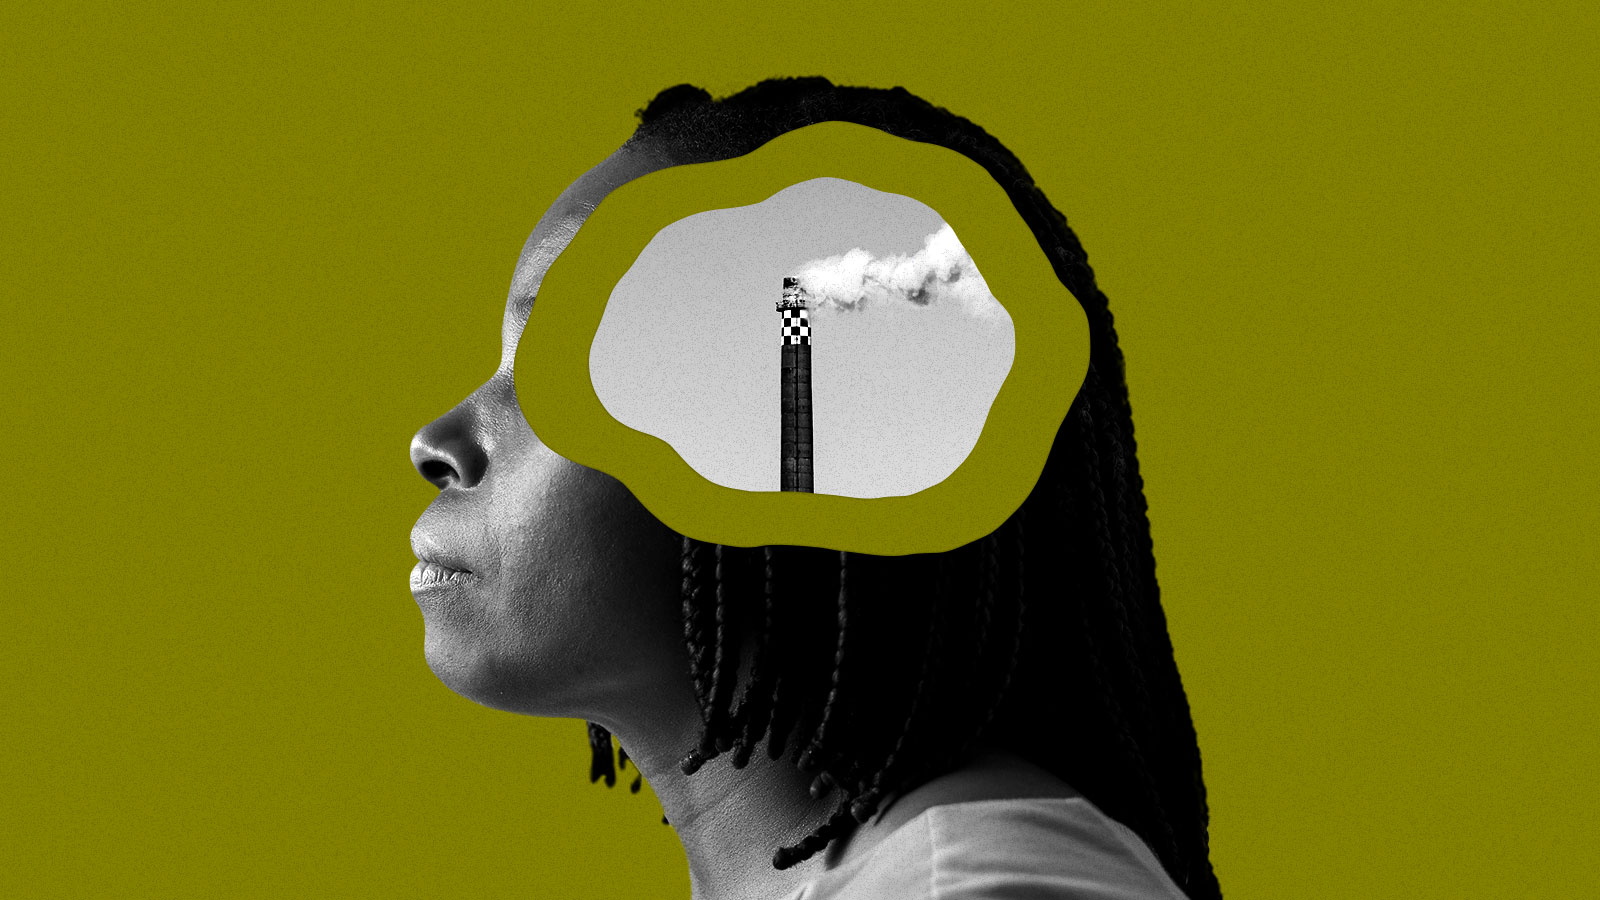 Collage of an older woman with an image of a smokestack placed within the center of her head